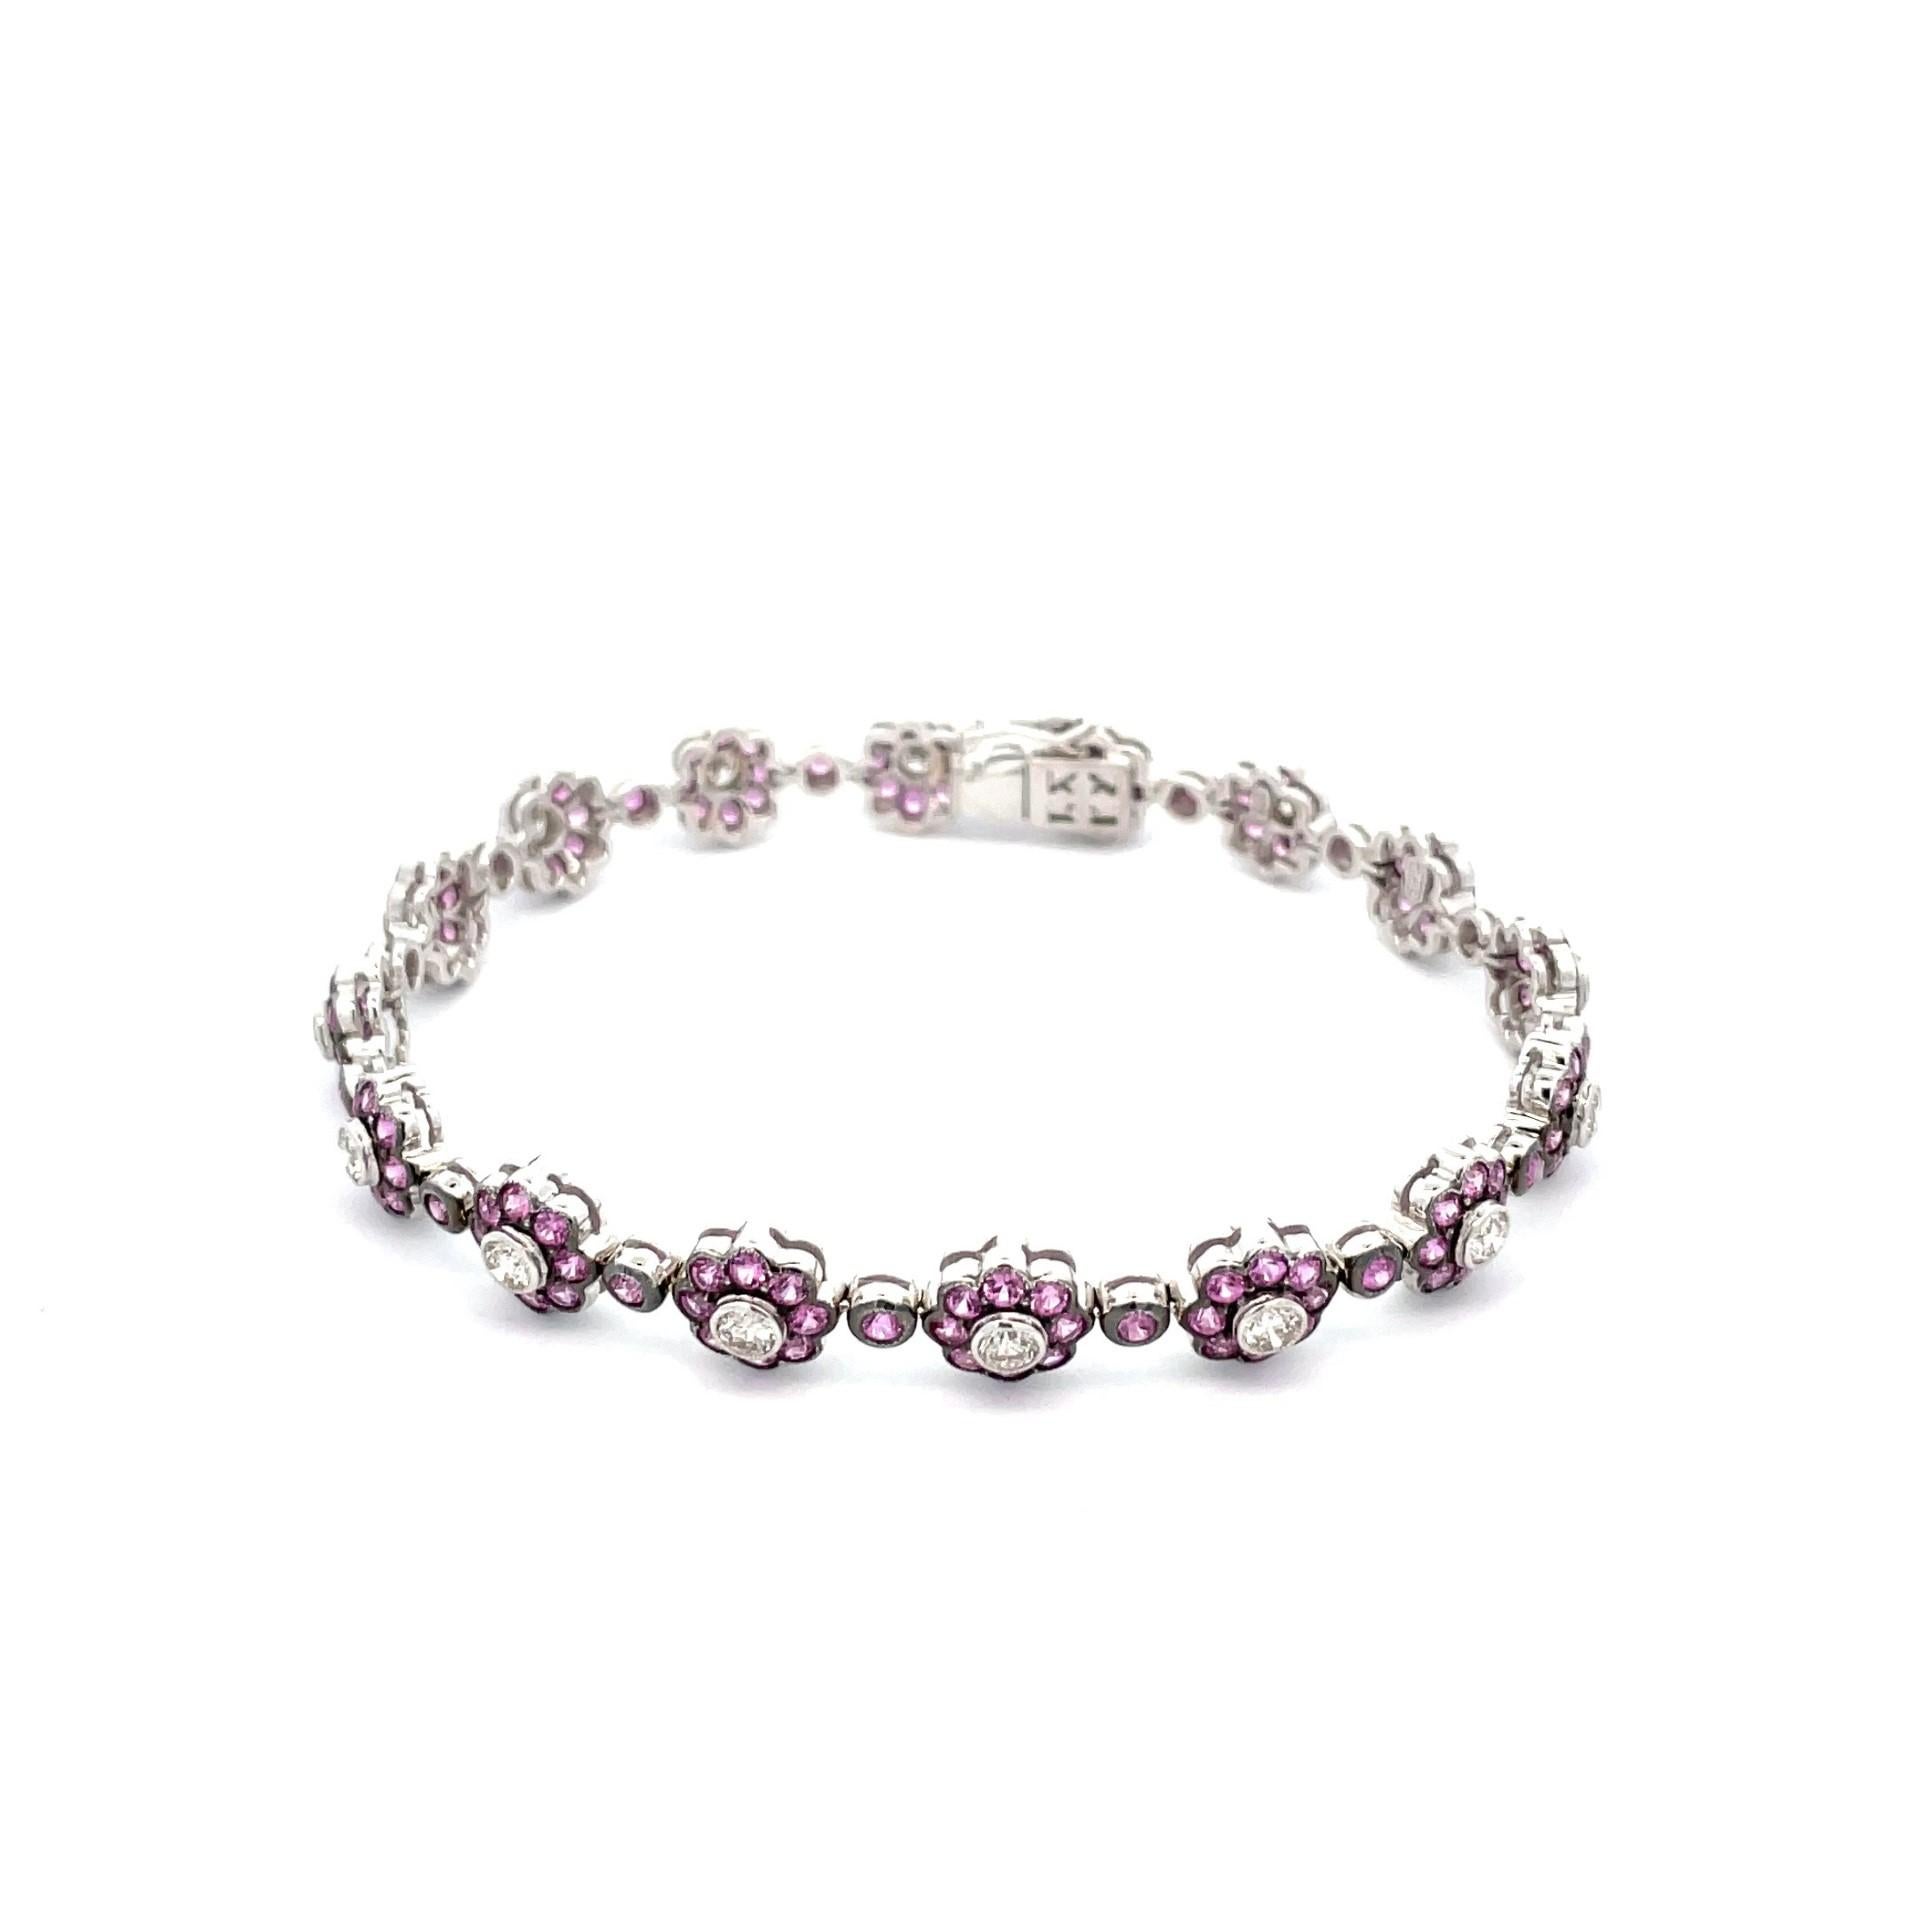 A gorgeous flower bracelet in 18kt white gold with natural pink sapphires and brilliant cut diamonds with a black rhodium finish that highlight the natural pink colour. An elegant casual look for everyday.

144 natural pink sapphires weighing 5.00ct